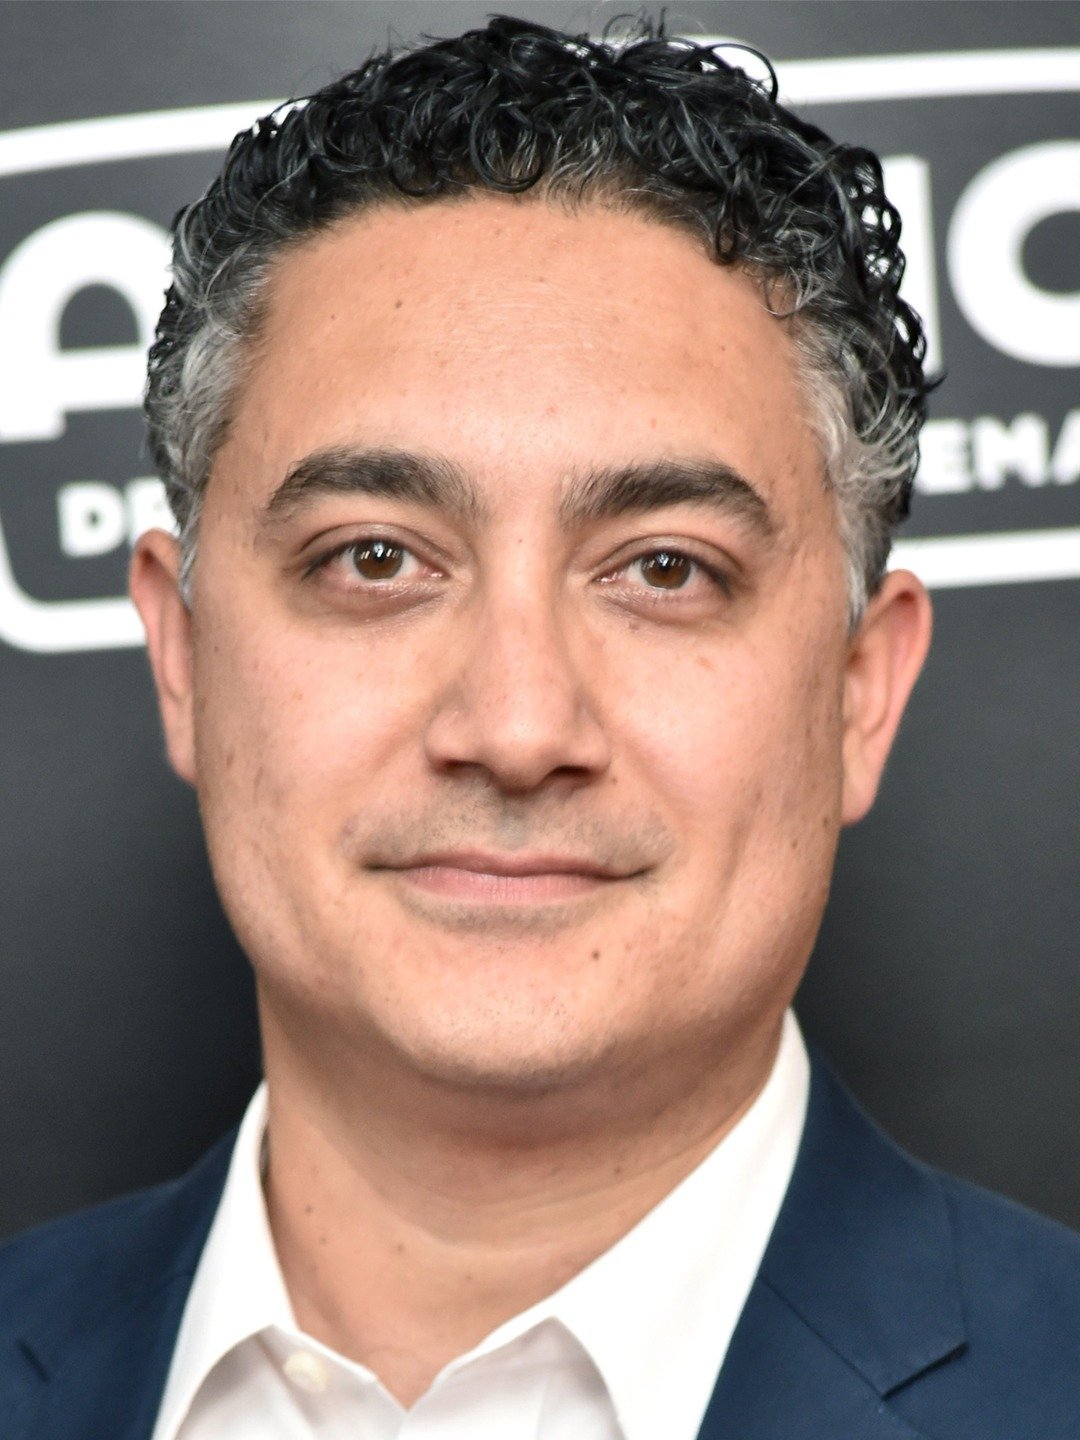 How tall is Alessandro Juliani?